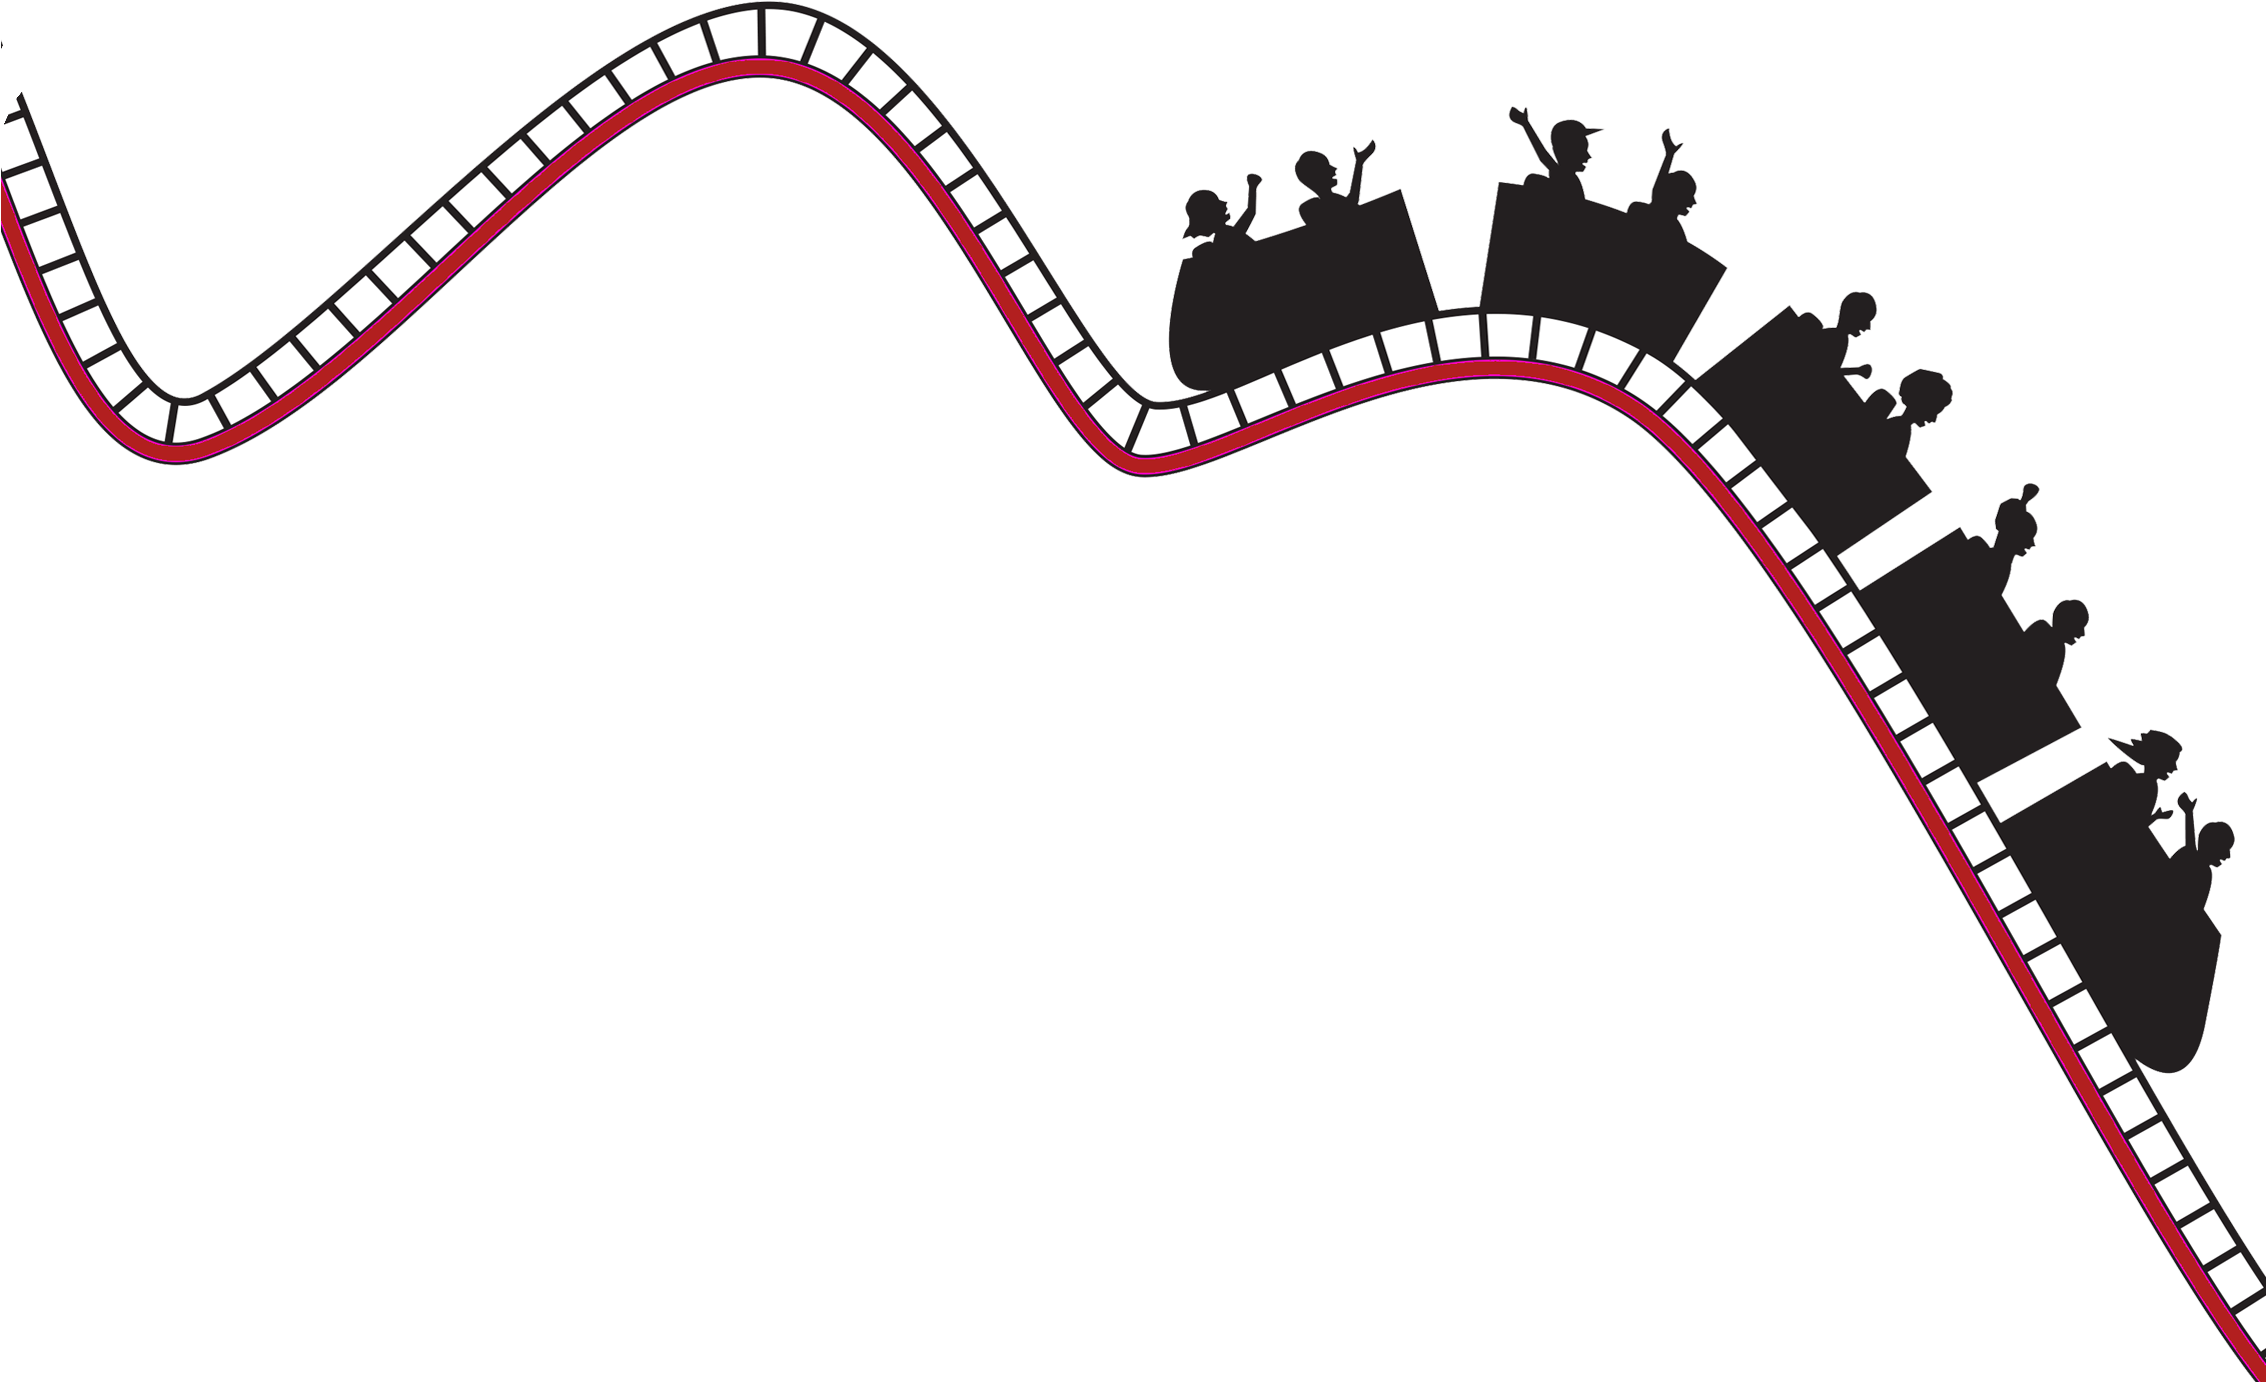 Rollercoaster clipart roller coaster. Partial image graph 